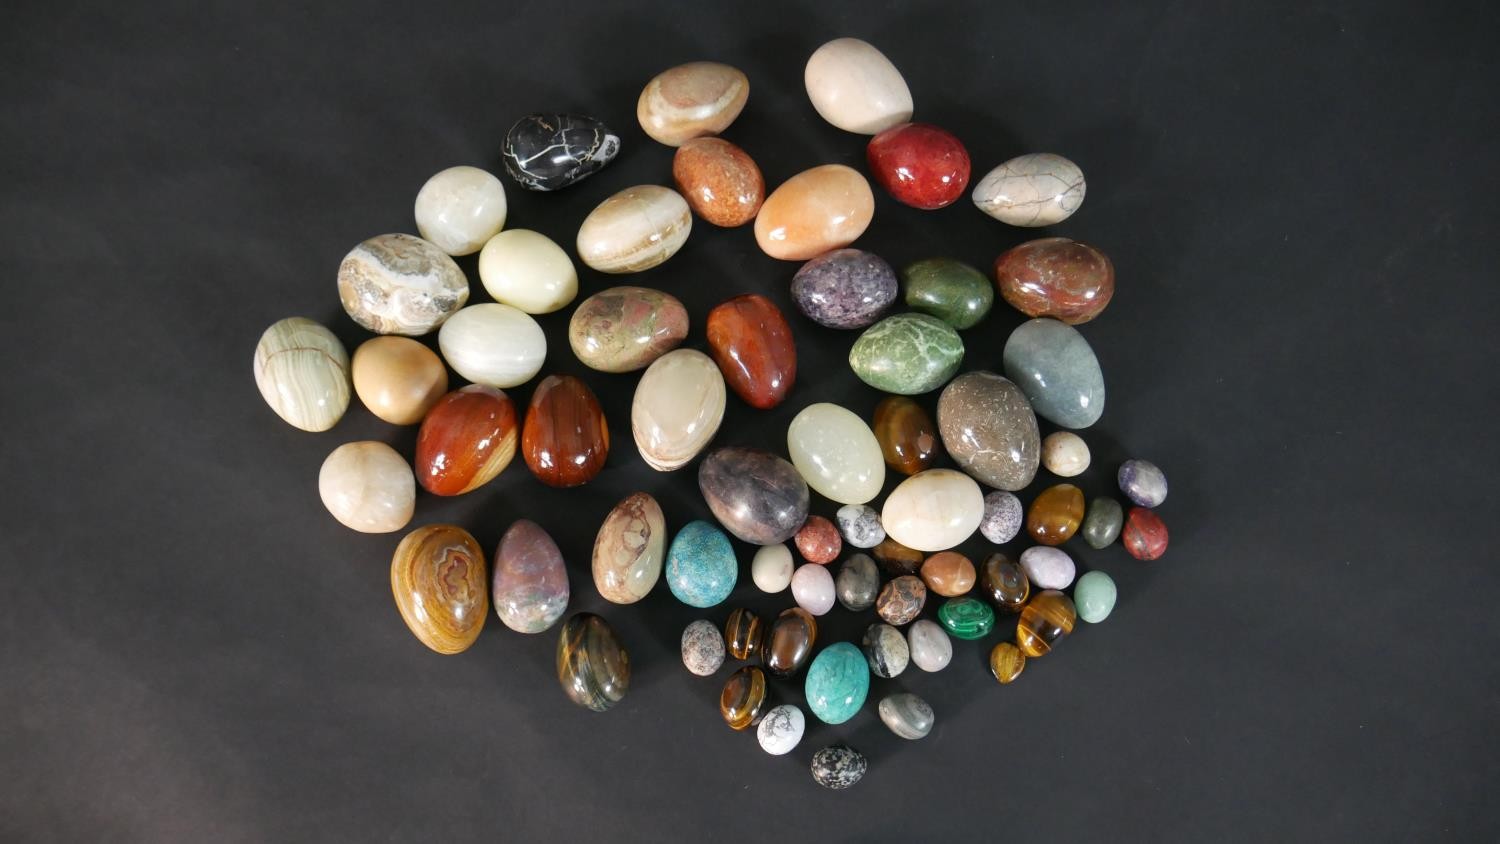 A collection of approximately sixty carved and polished gemstone and mineral eggs, various sizes.